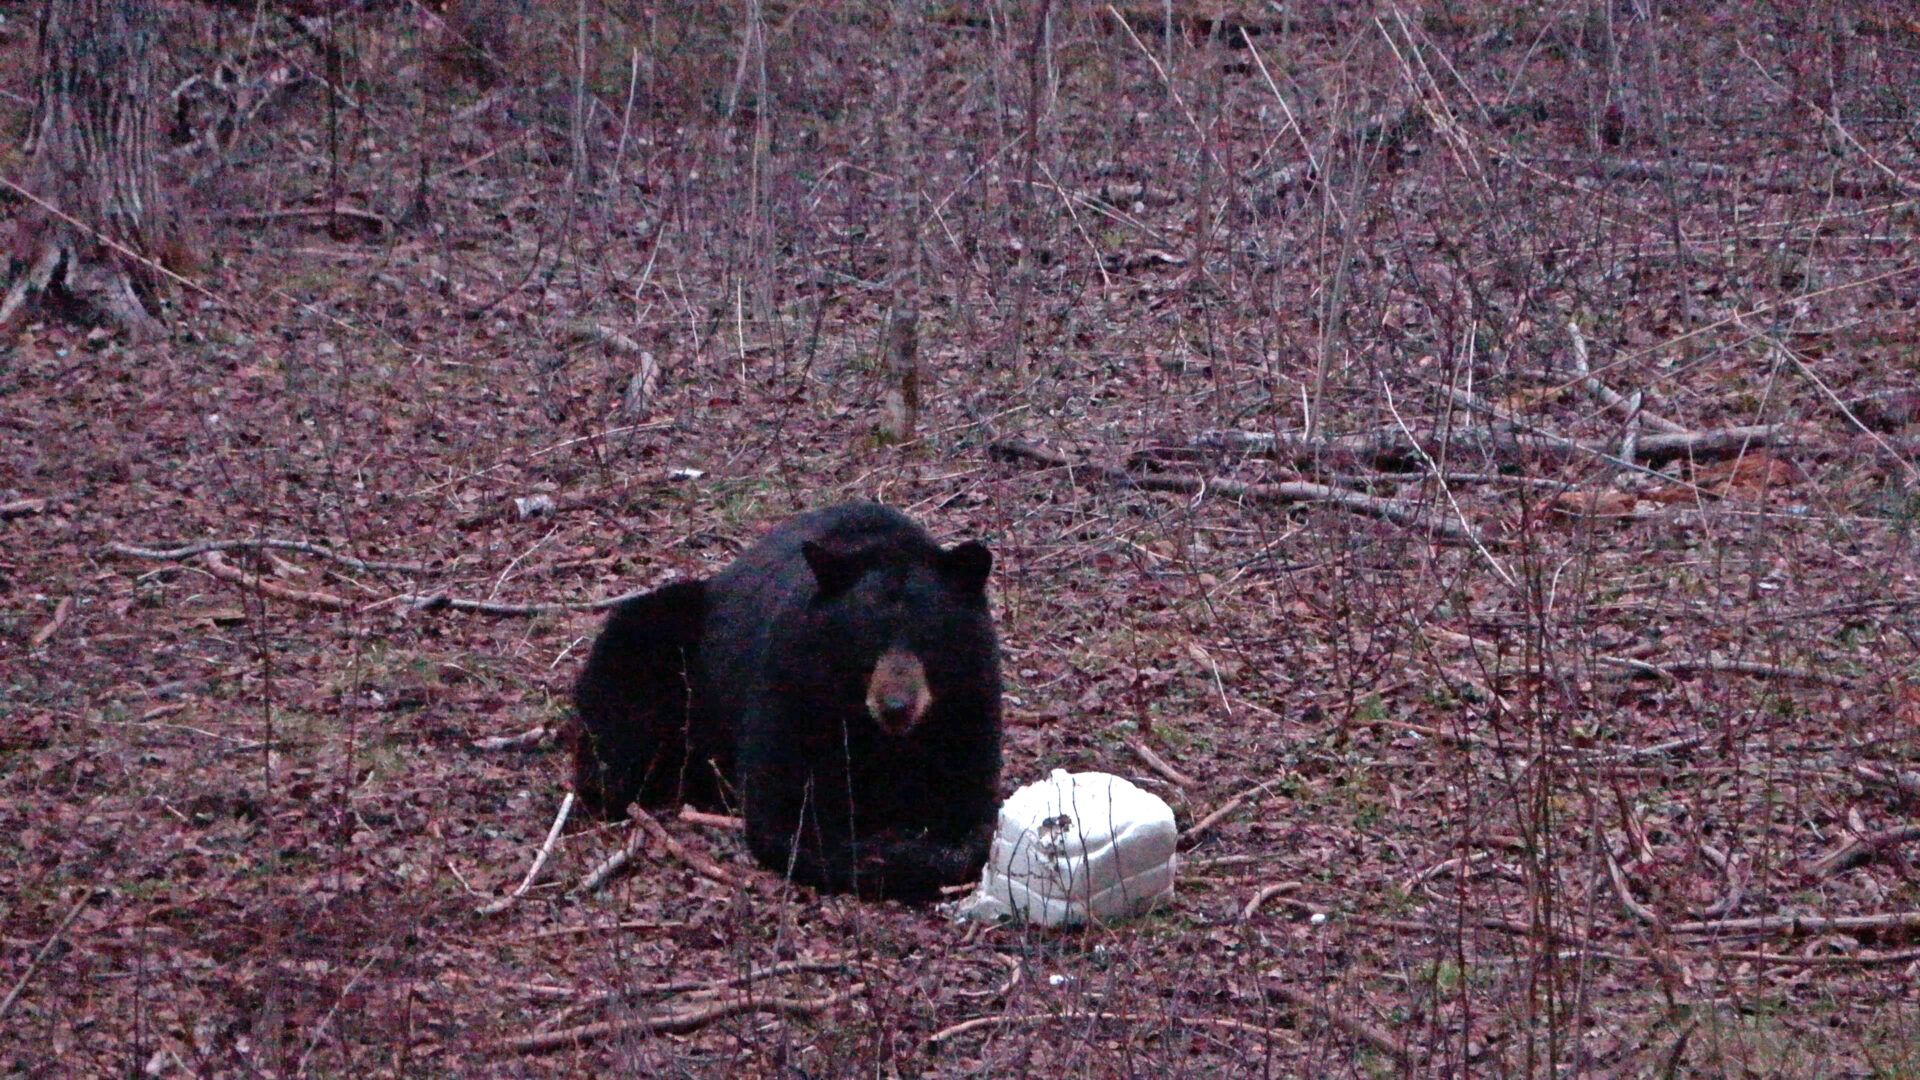 A black bear sitting on the ground next to a white object.